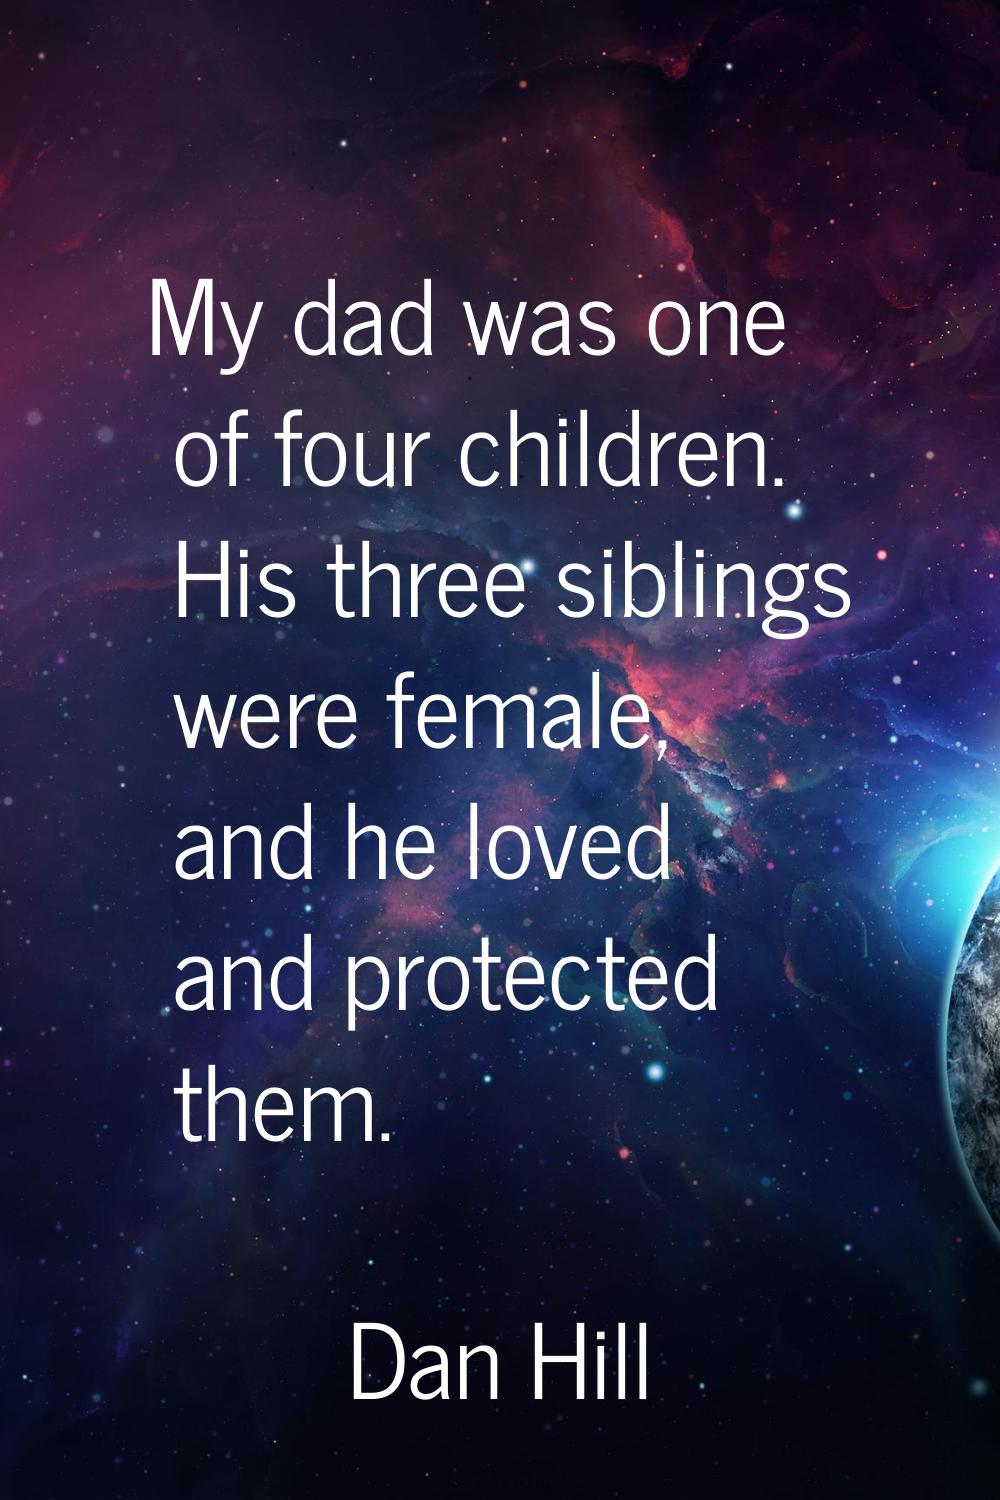 My dad was one of four children. His three siblings were female, and he loved and protected them.